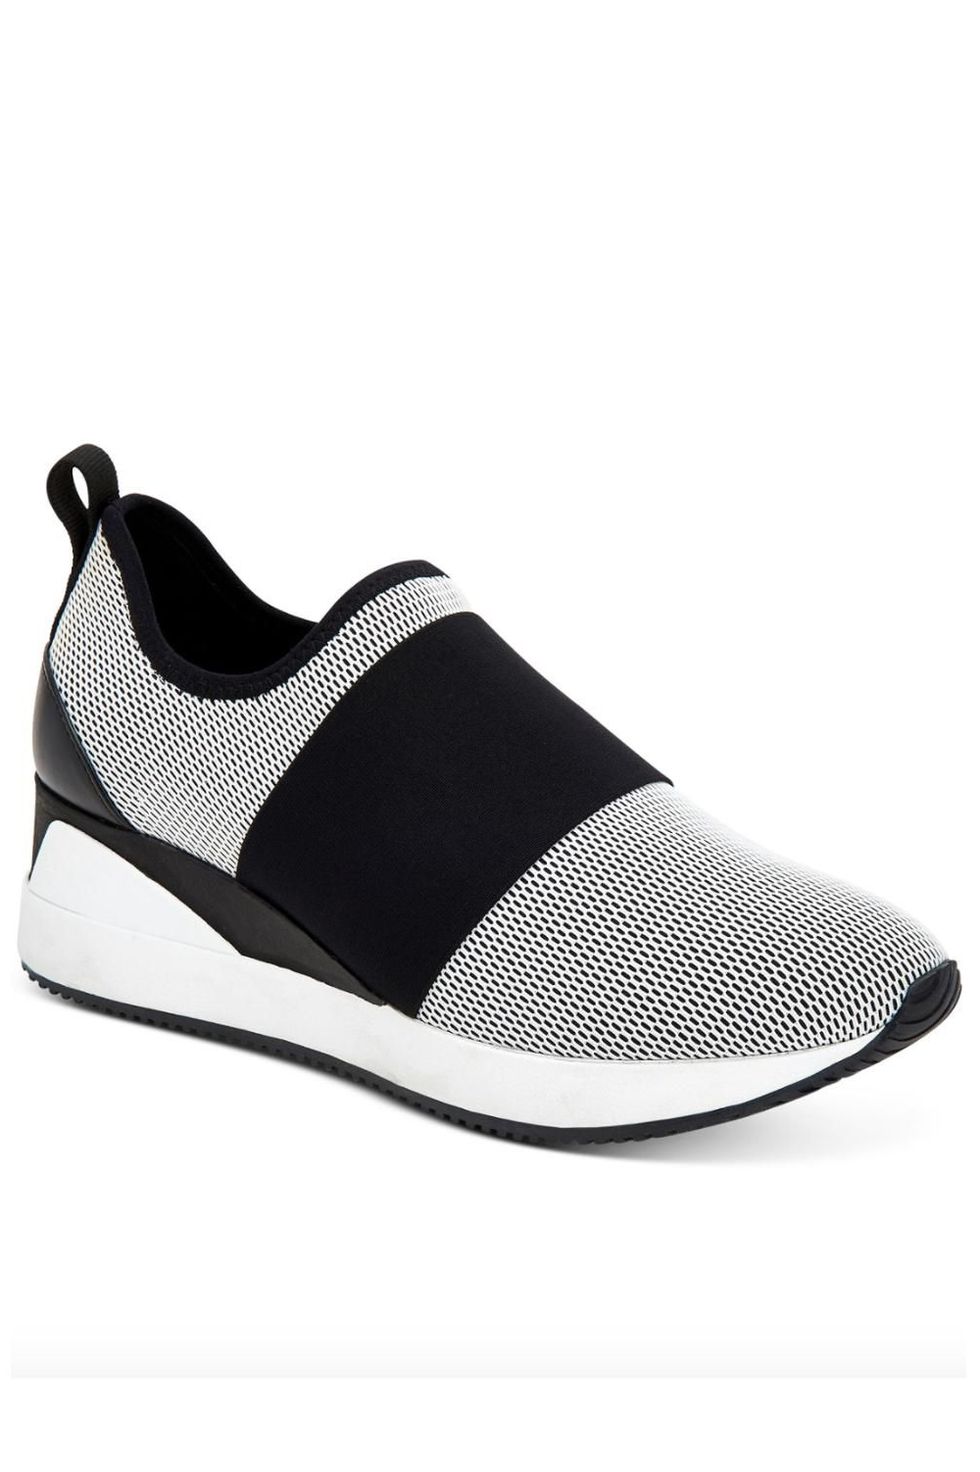 The Best Slip On Sneakers to Slide through Any Day!